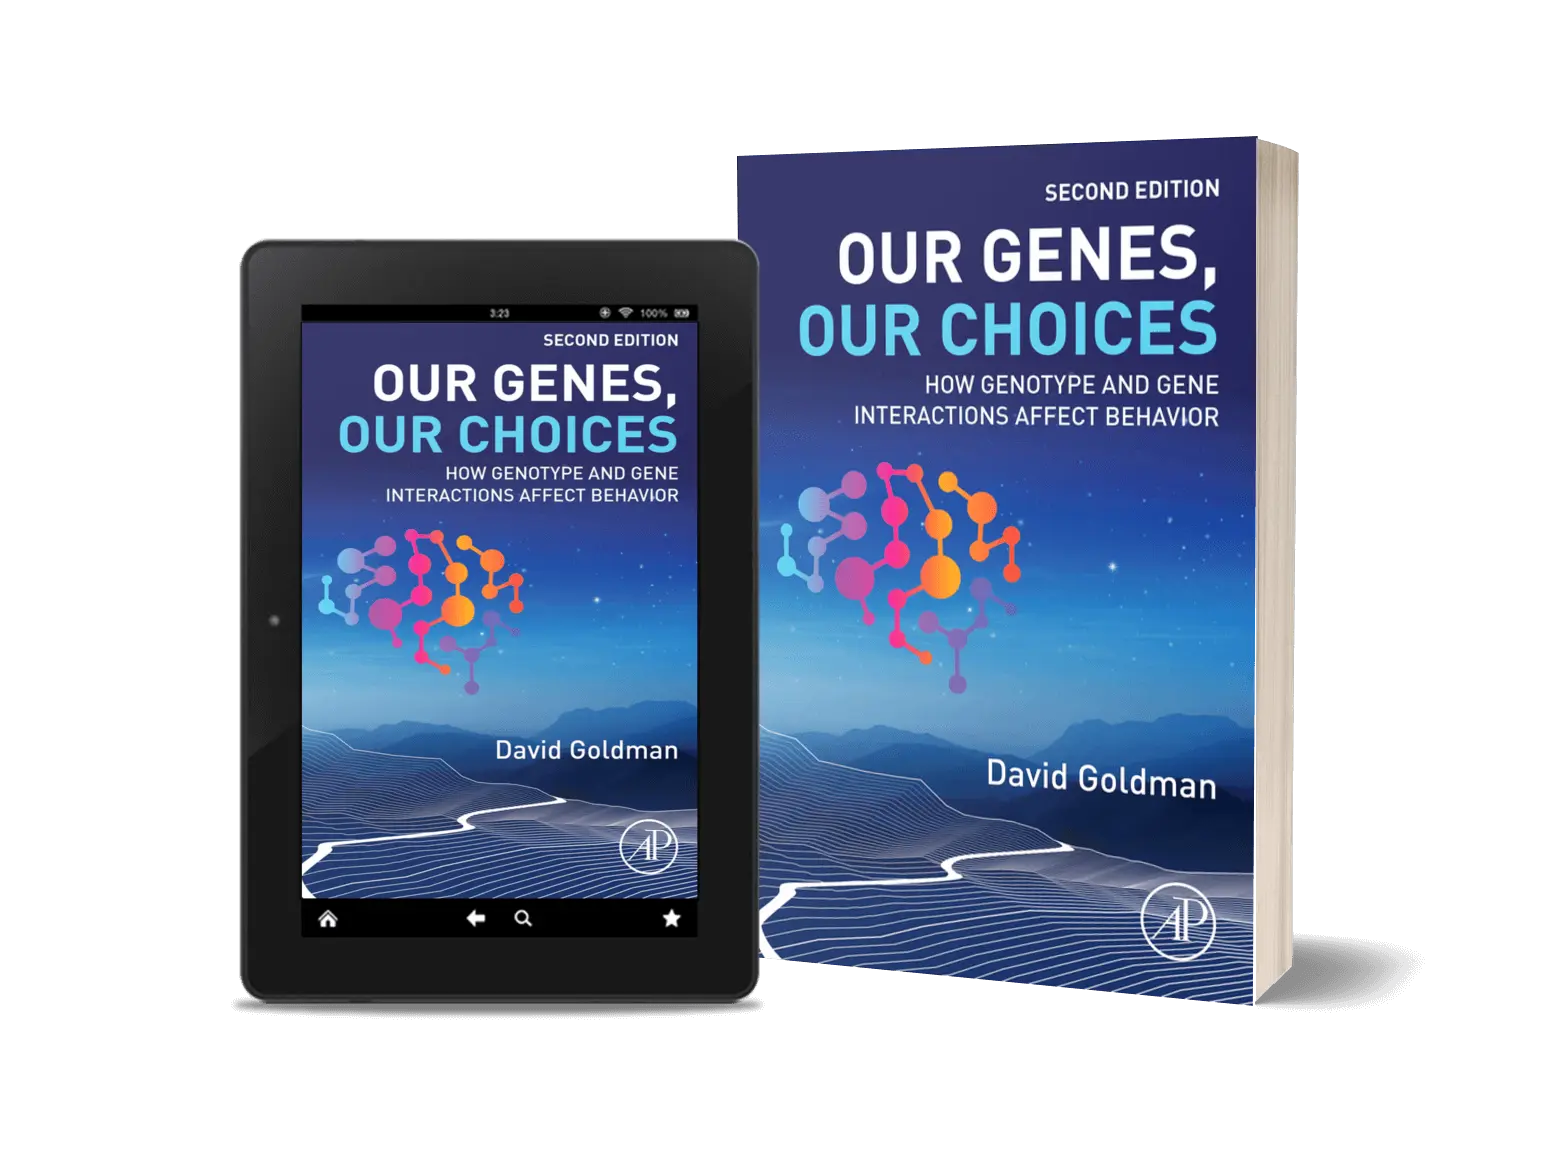 The front cover of the book Our Genes, Our Choices by David Goldman